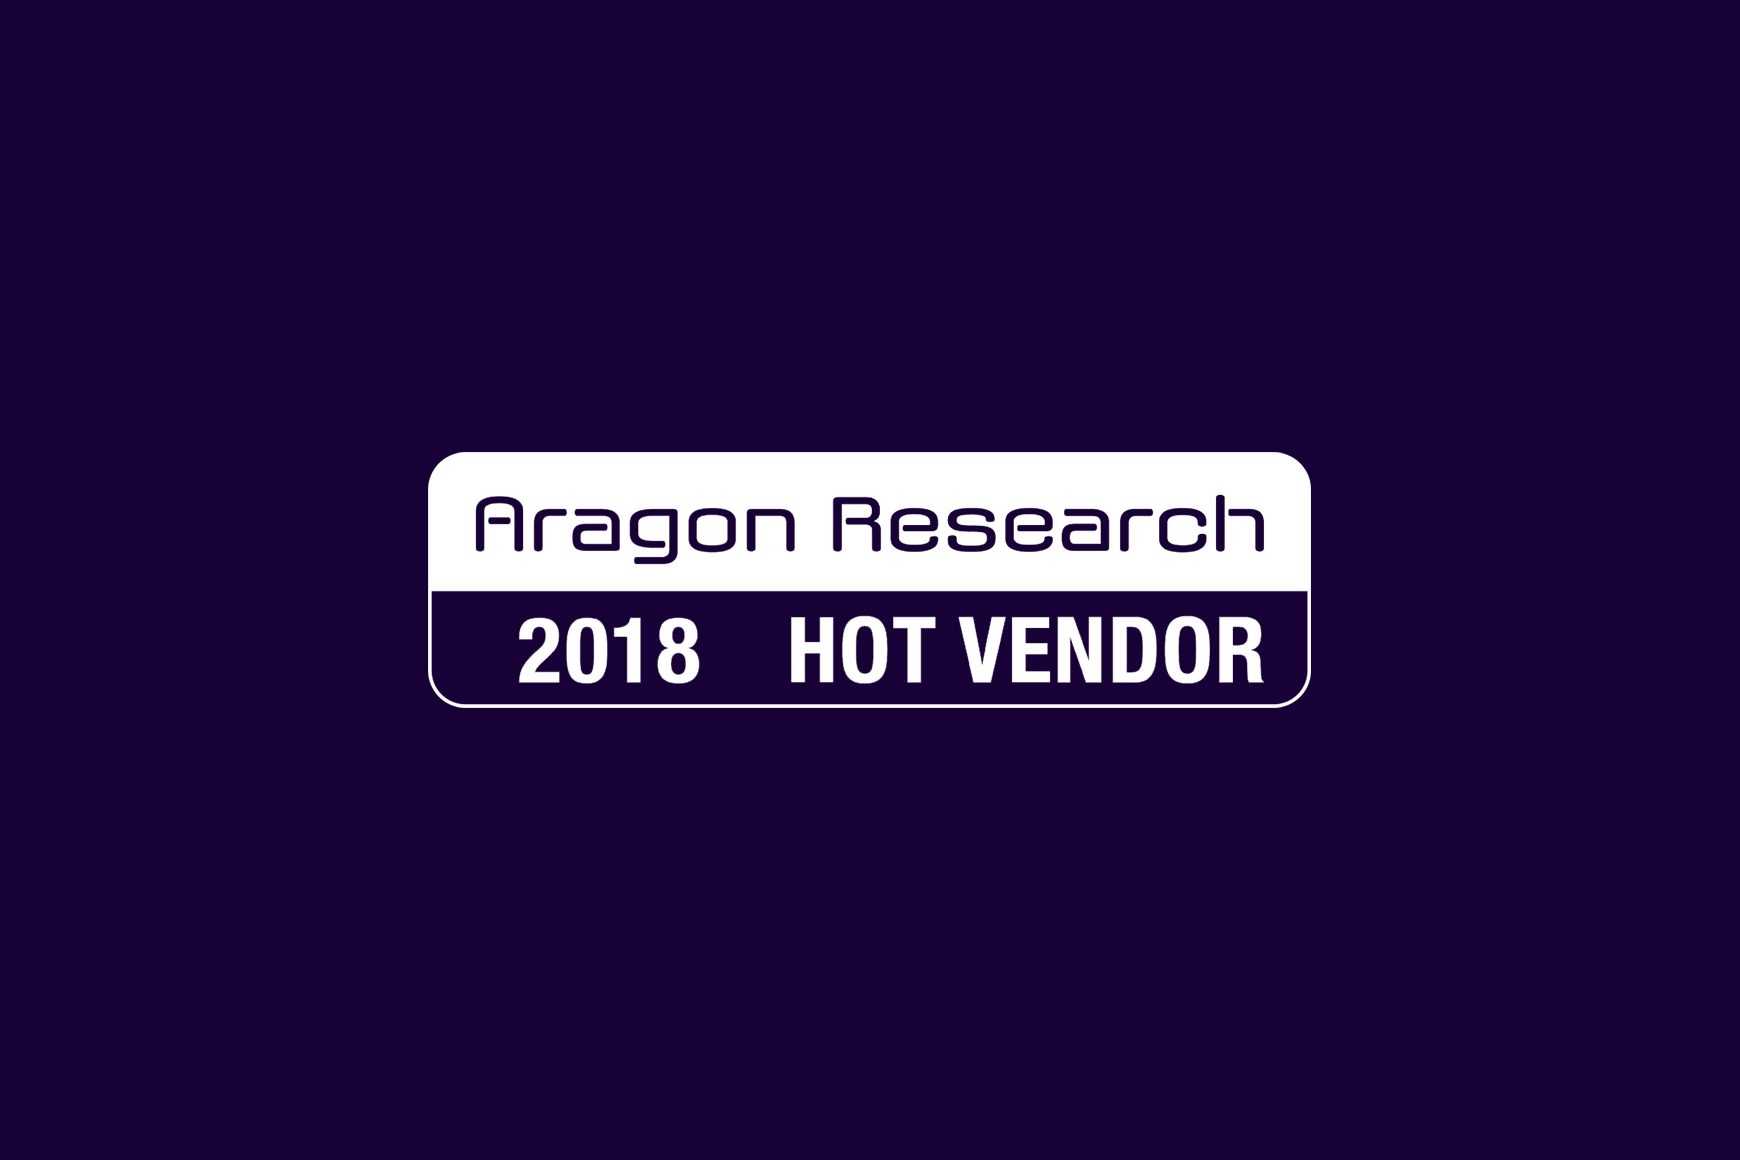 Talkdesk is a “Hot Vendor” in Intelligent Contact Center according to Aragon Research